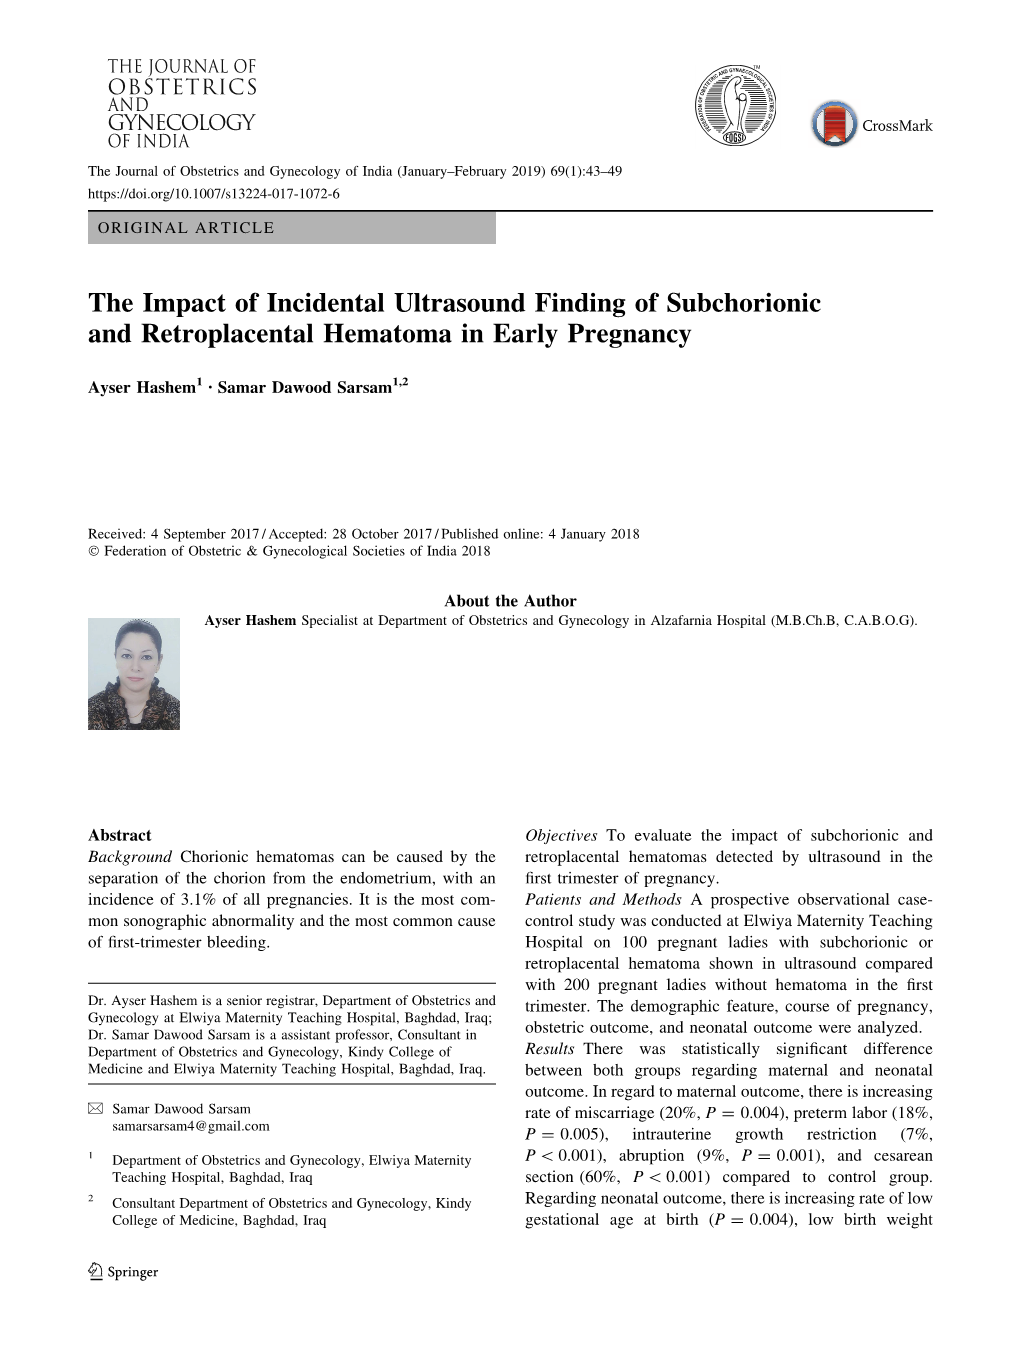 The Impact of Incidental Ultrasound Finding of Subchorionic and Retroplacental Hematoma in Early Pregnancy